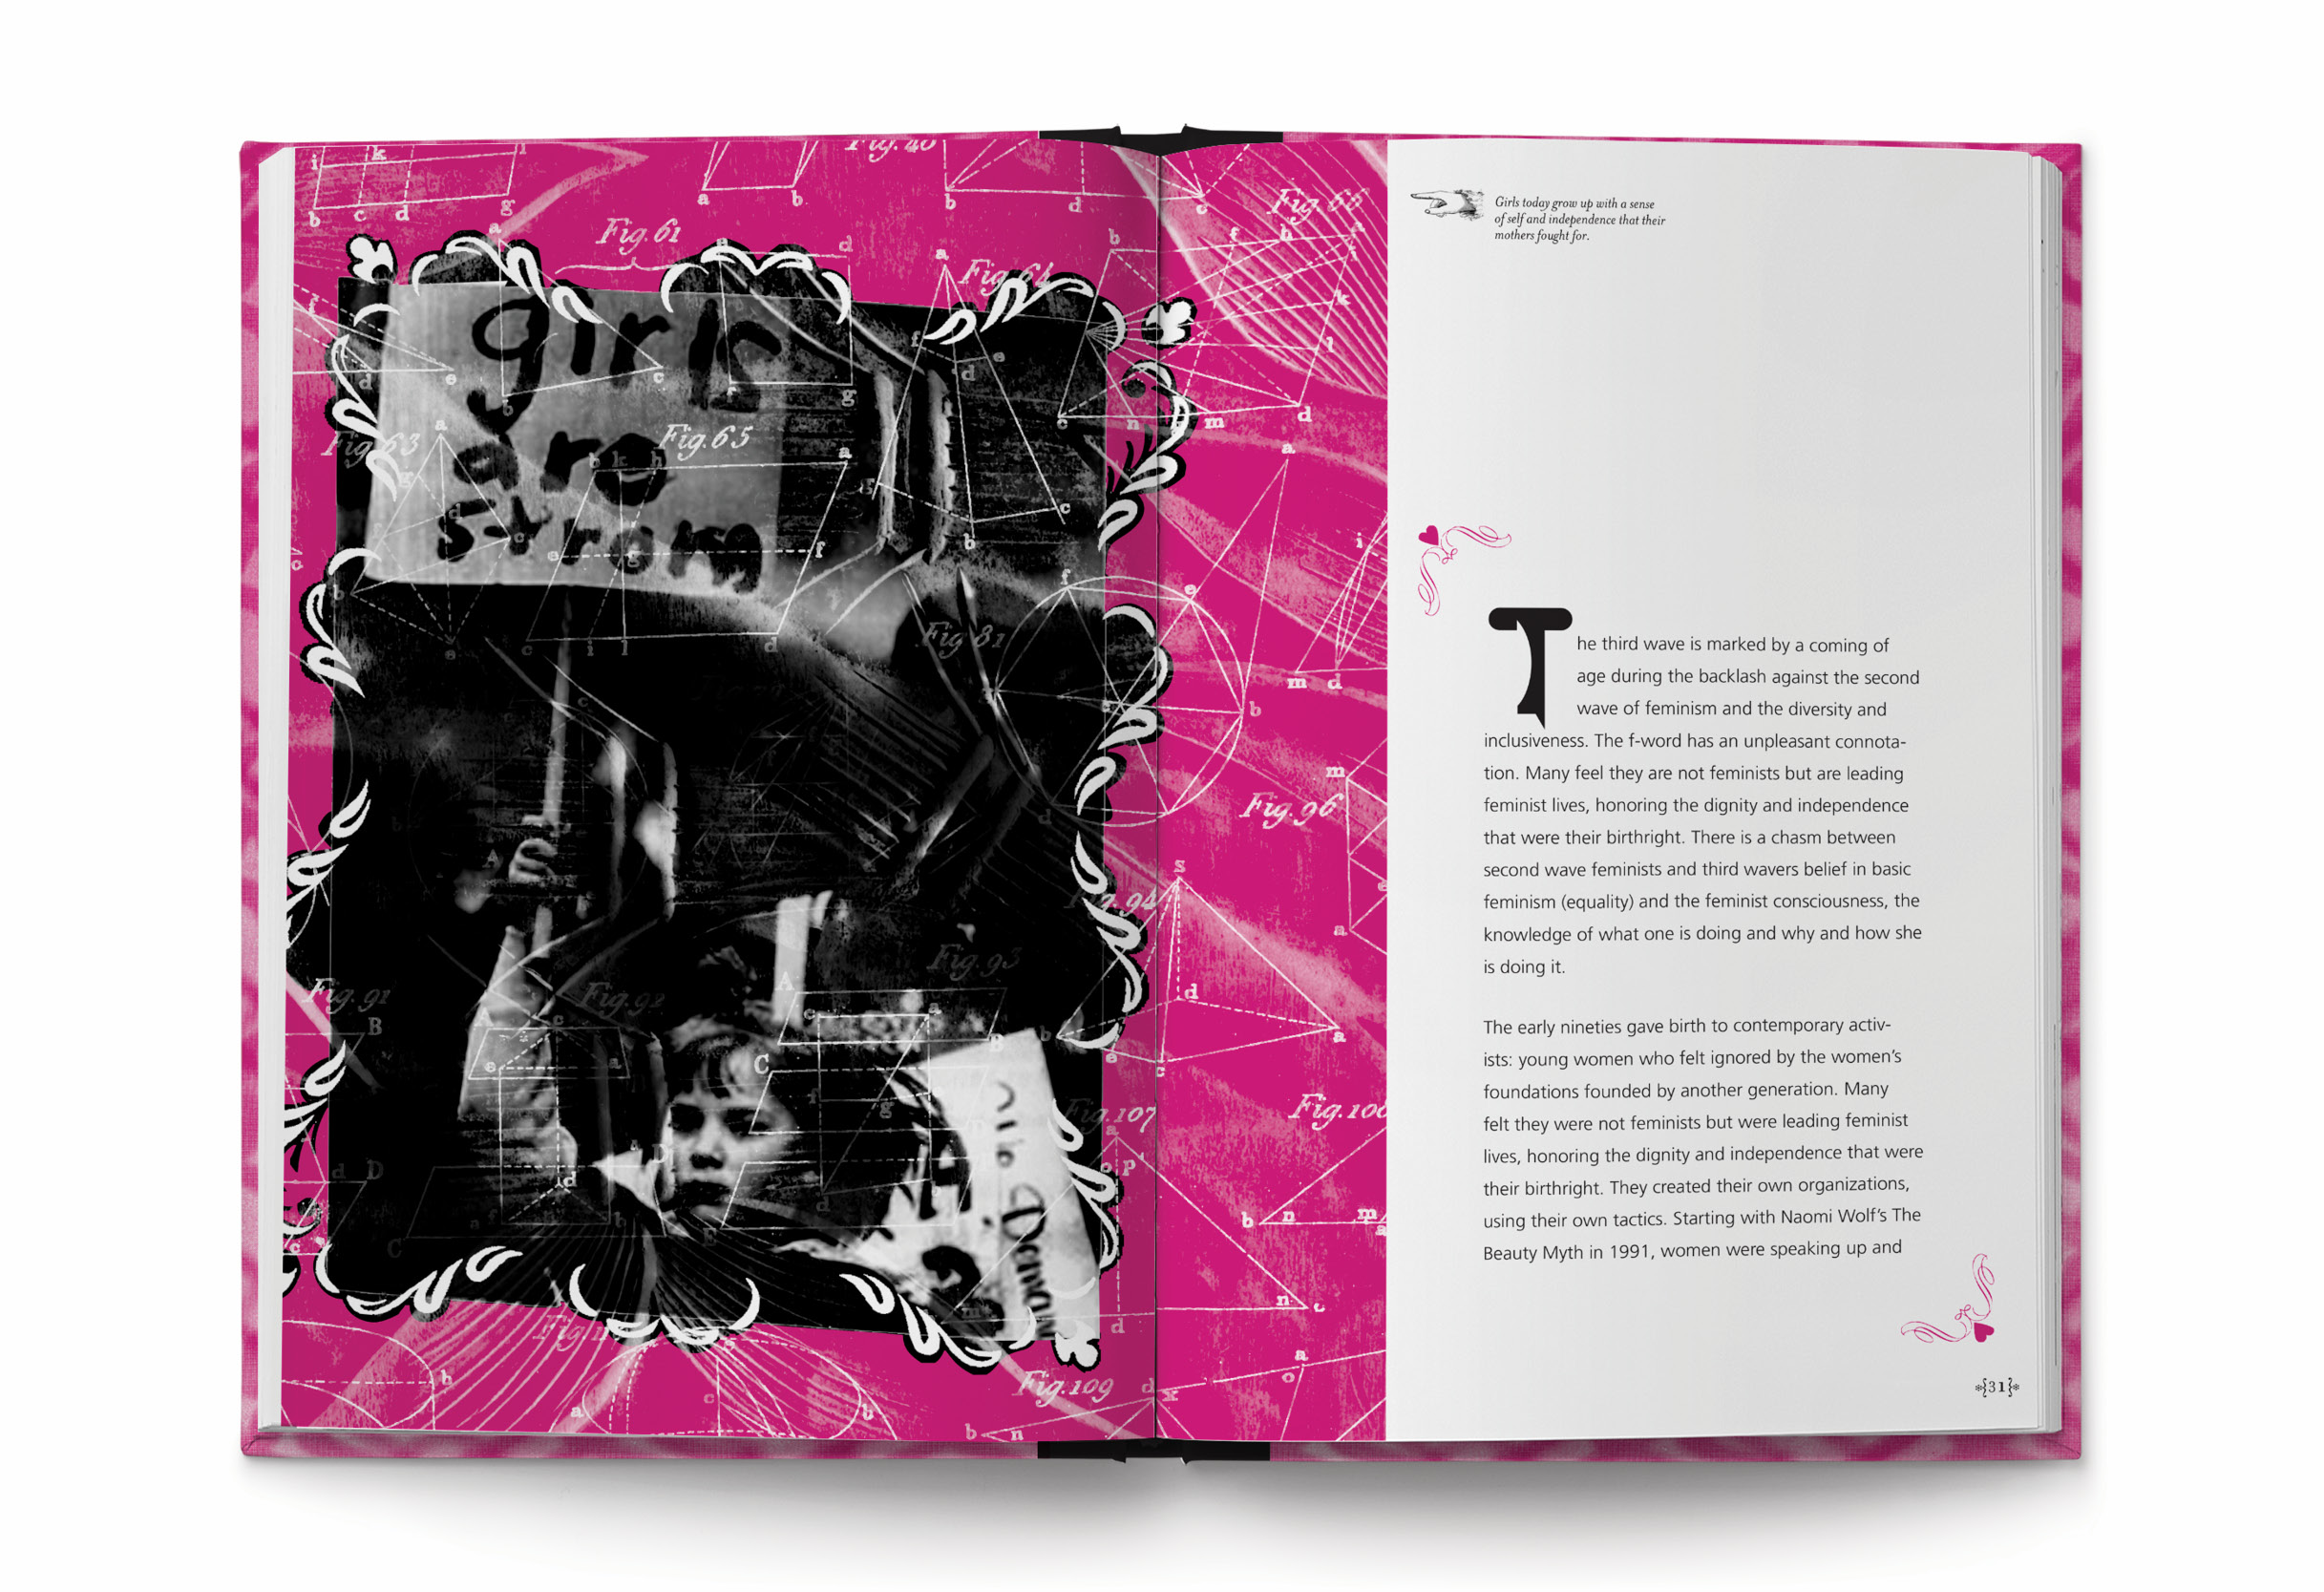 Interior spread of the book. Left hand page is a full bleed, monotoned magenta collaged image of a girl protesting. The image crossed the gutter and covers a quarter of the next page. The right hand page shows a one column page of copy.